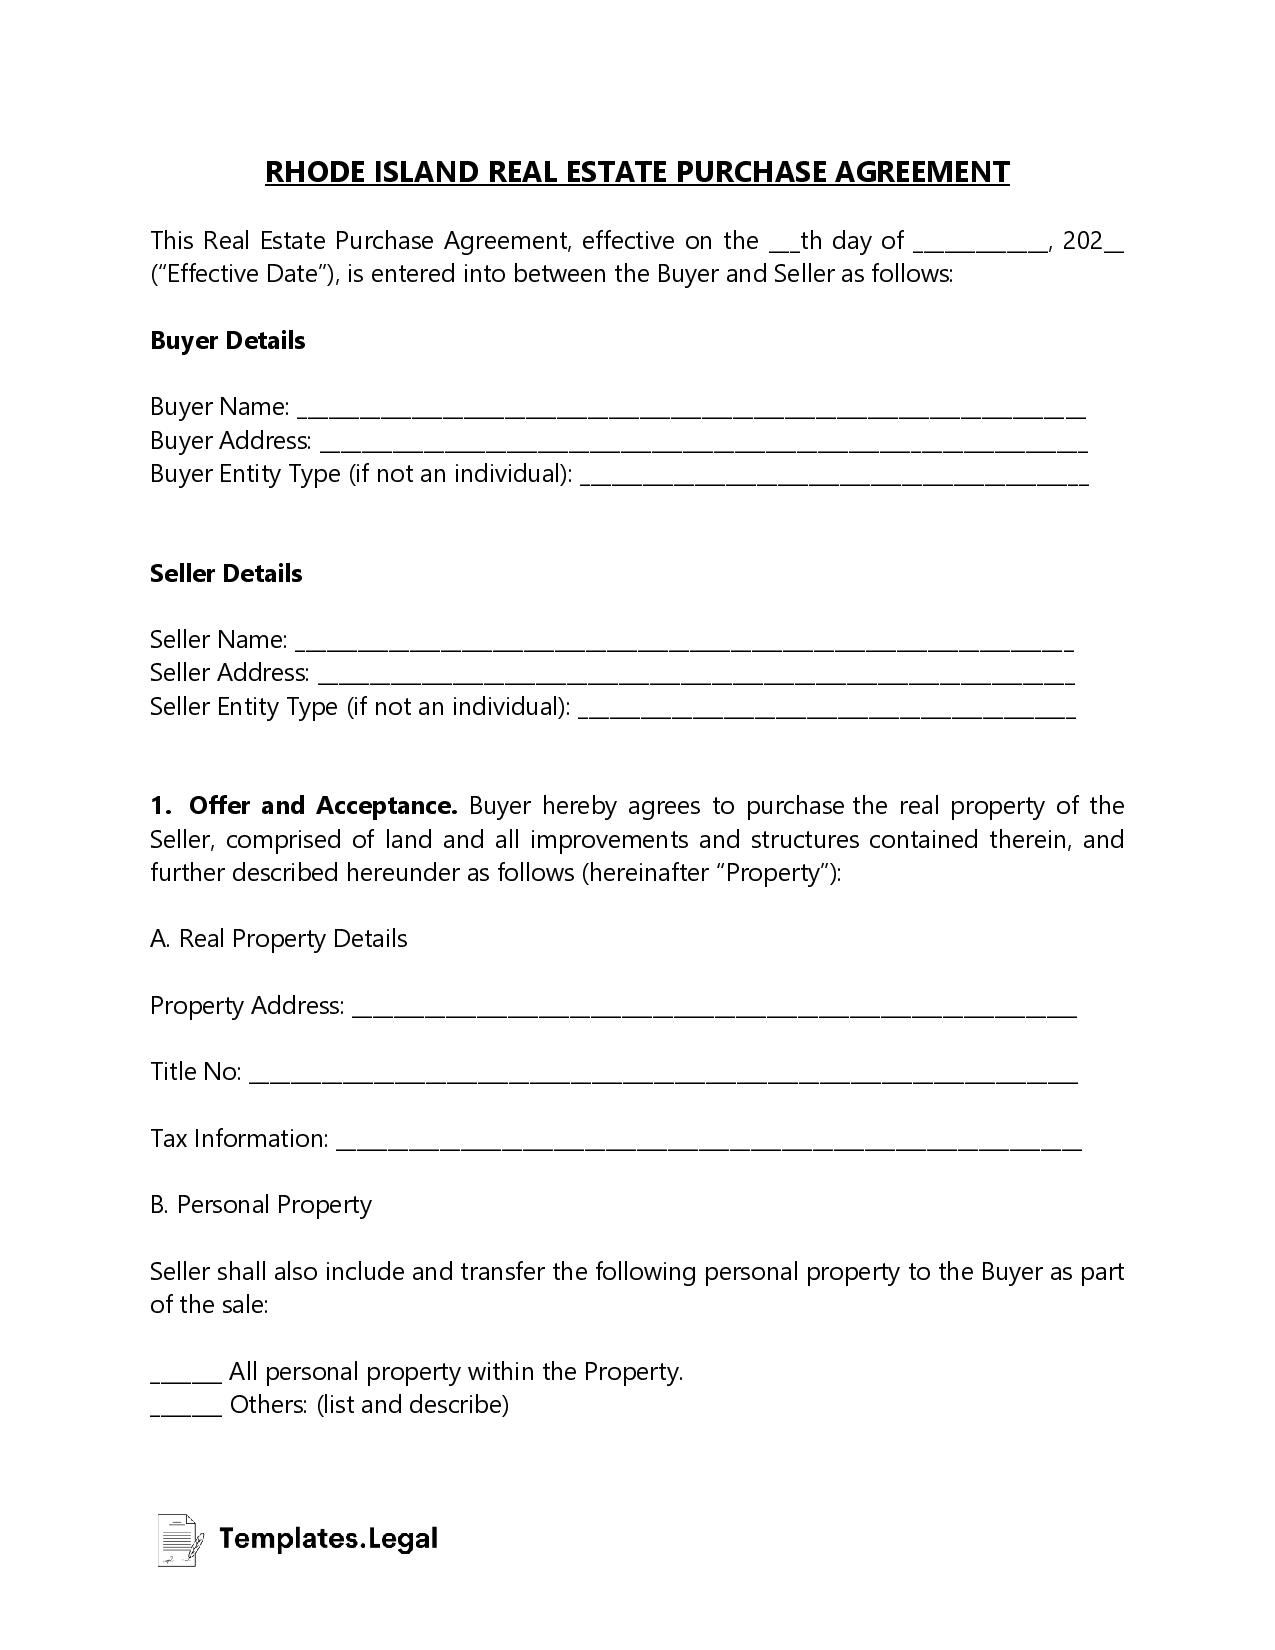 Rhode Island Real Estate Purchase Agreement - Templates.Legal